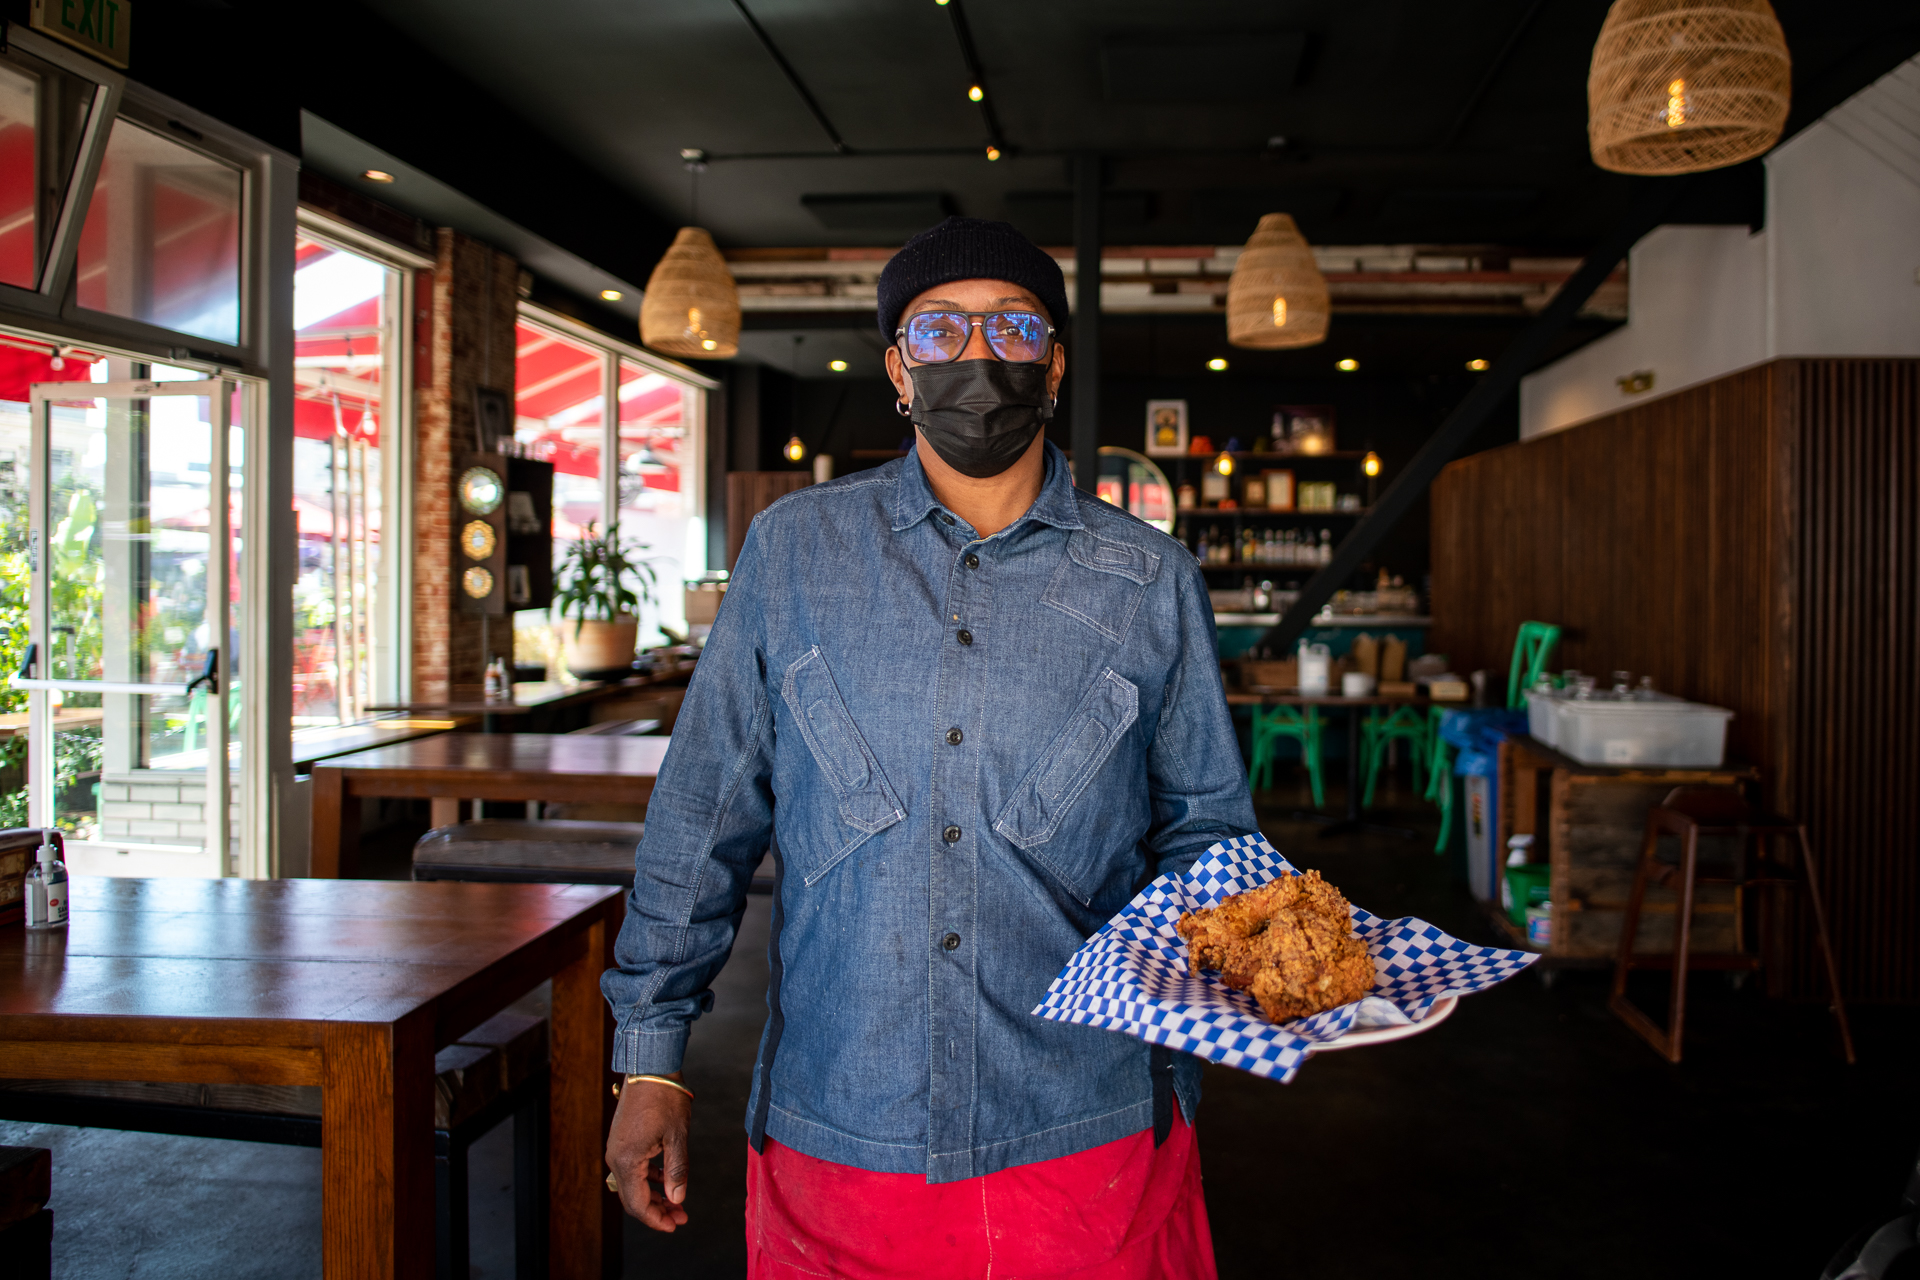 Wearing a face mask, chef Sarah Kirnon holds a plate of fried chicken at Miss Ollie's, her Old Oakland restaurant.